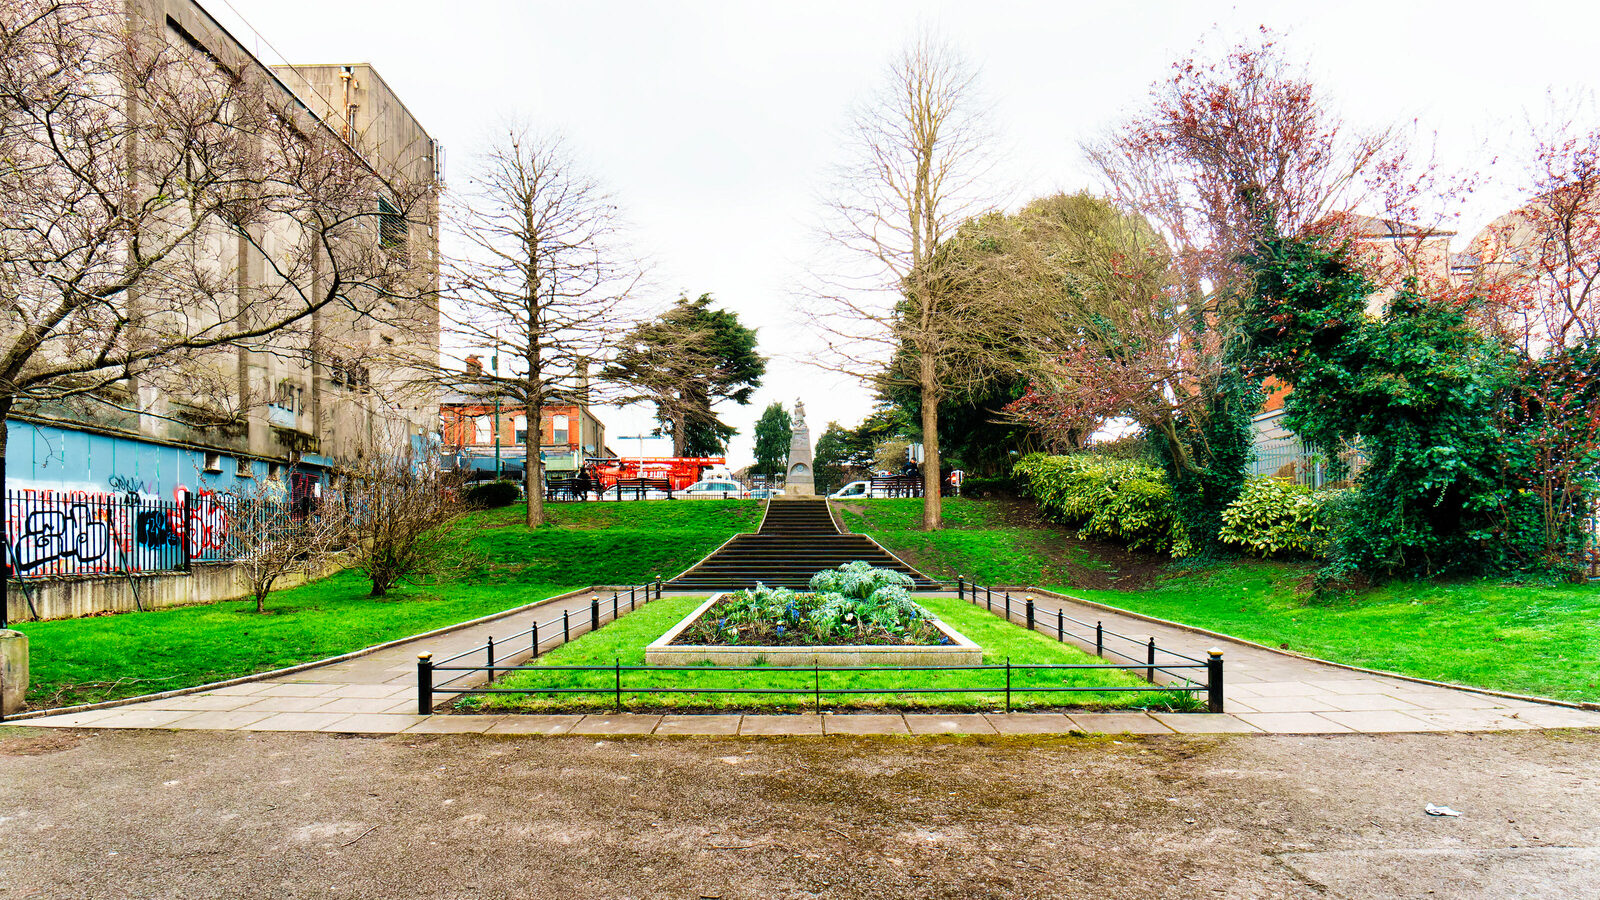 THE ROYAL CANAL WALK LINEAR PARK [FEATURING A 1916 EASTER RISING MEMORIAL]-229547-1